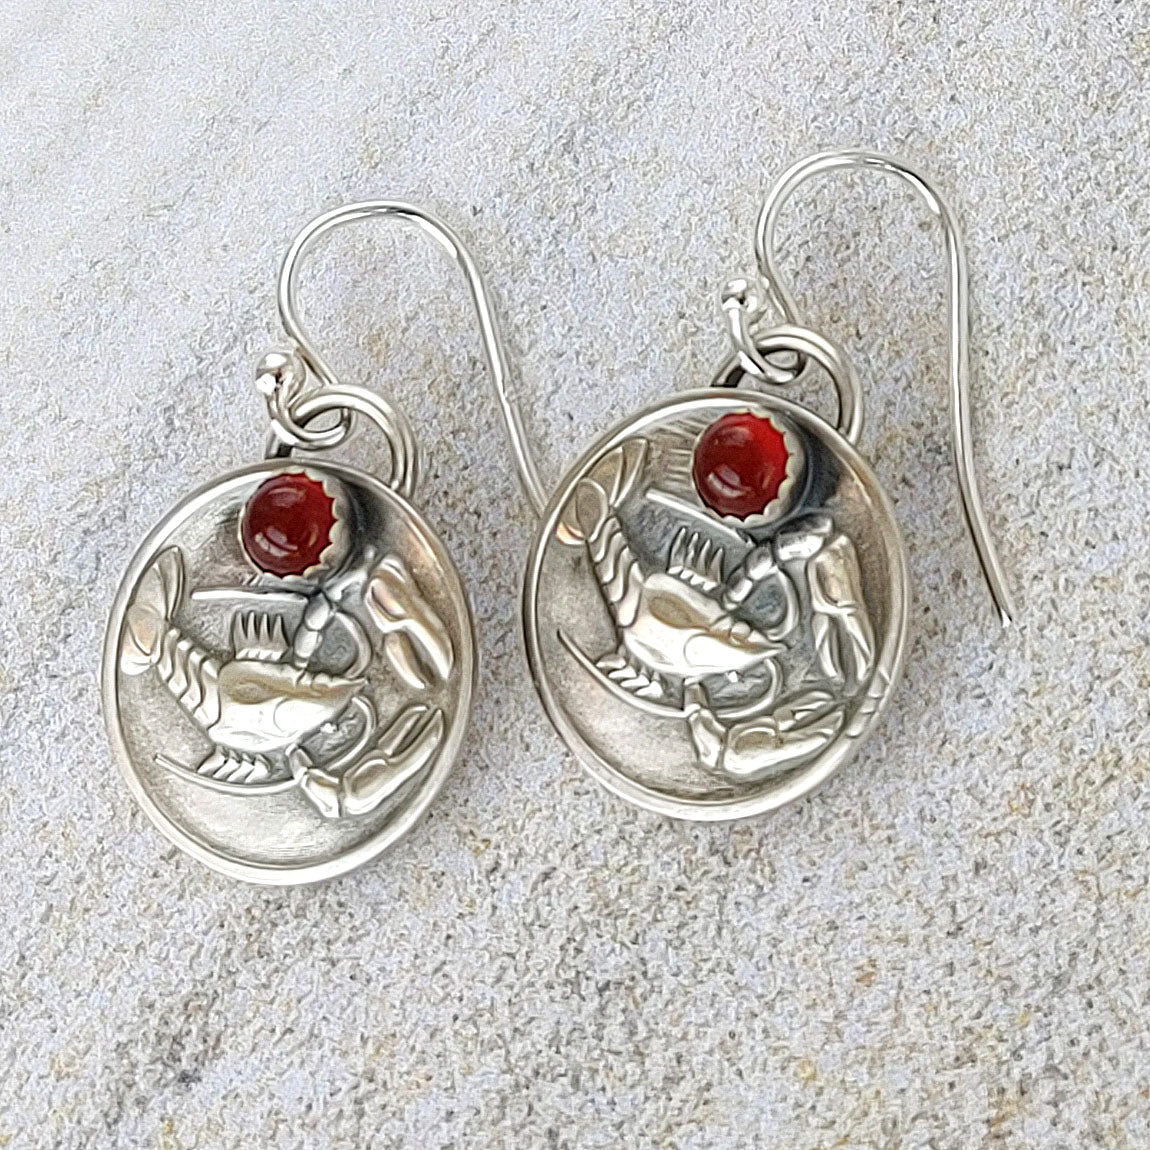 Round Lobster or Crayfish Earrings with Gemstones